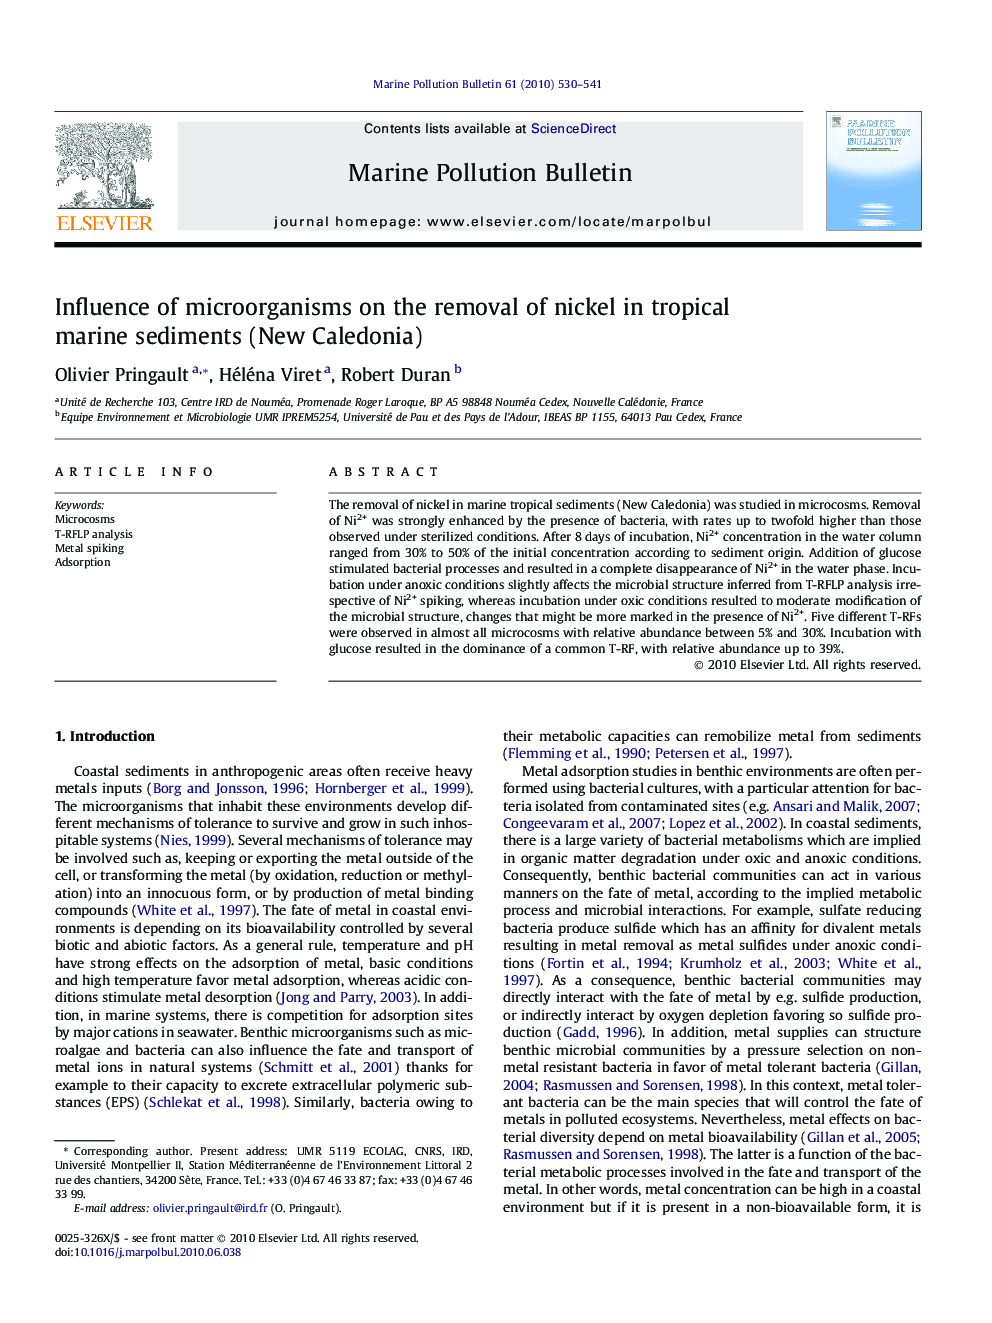 Influence of microorganisms on the removal of nickel in tropical marine sediments (New Caledonia)